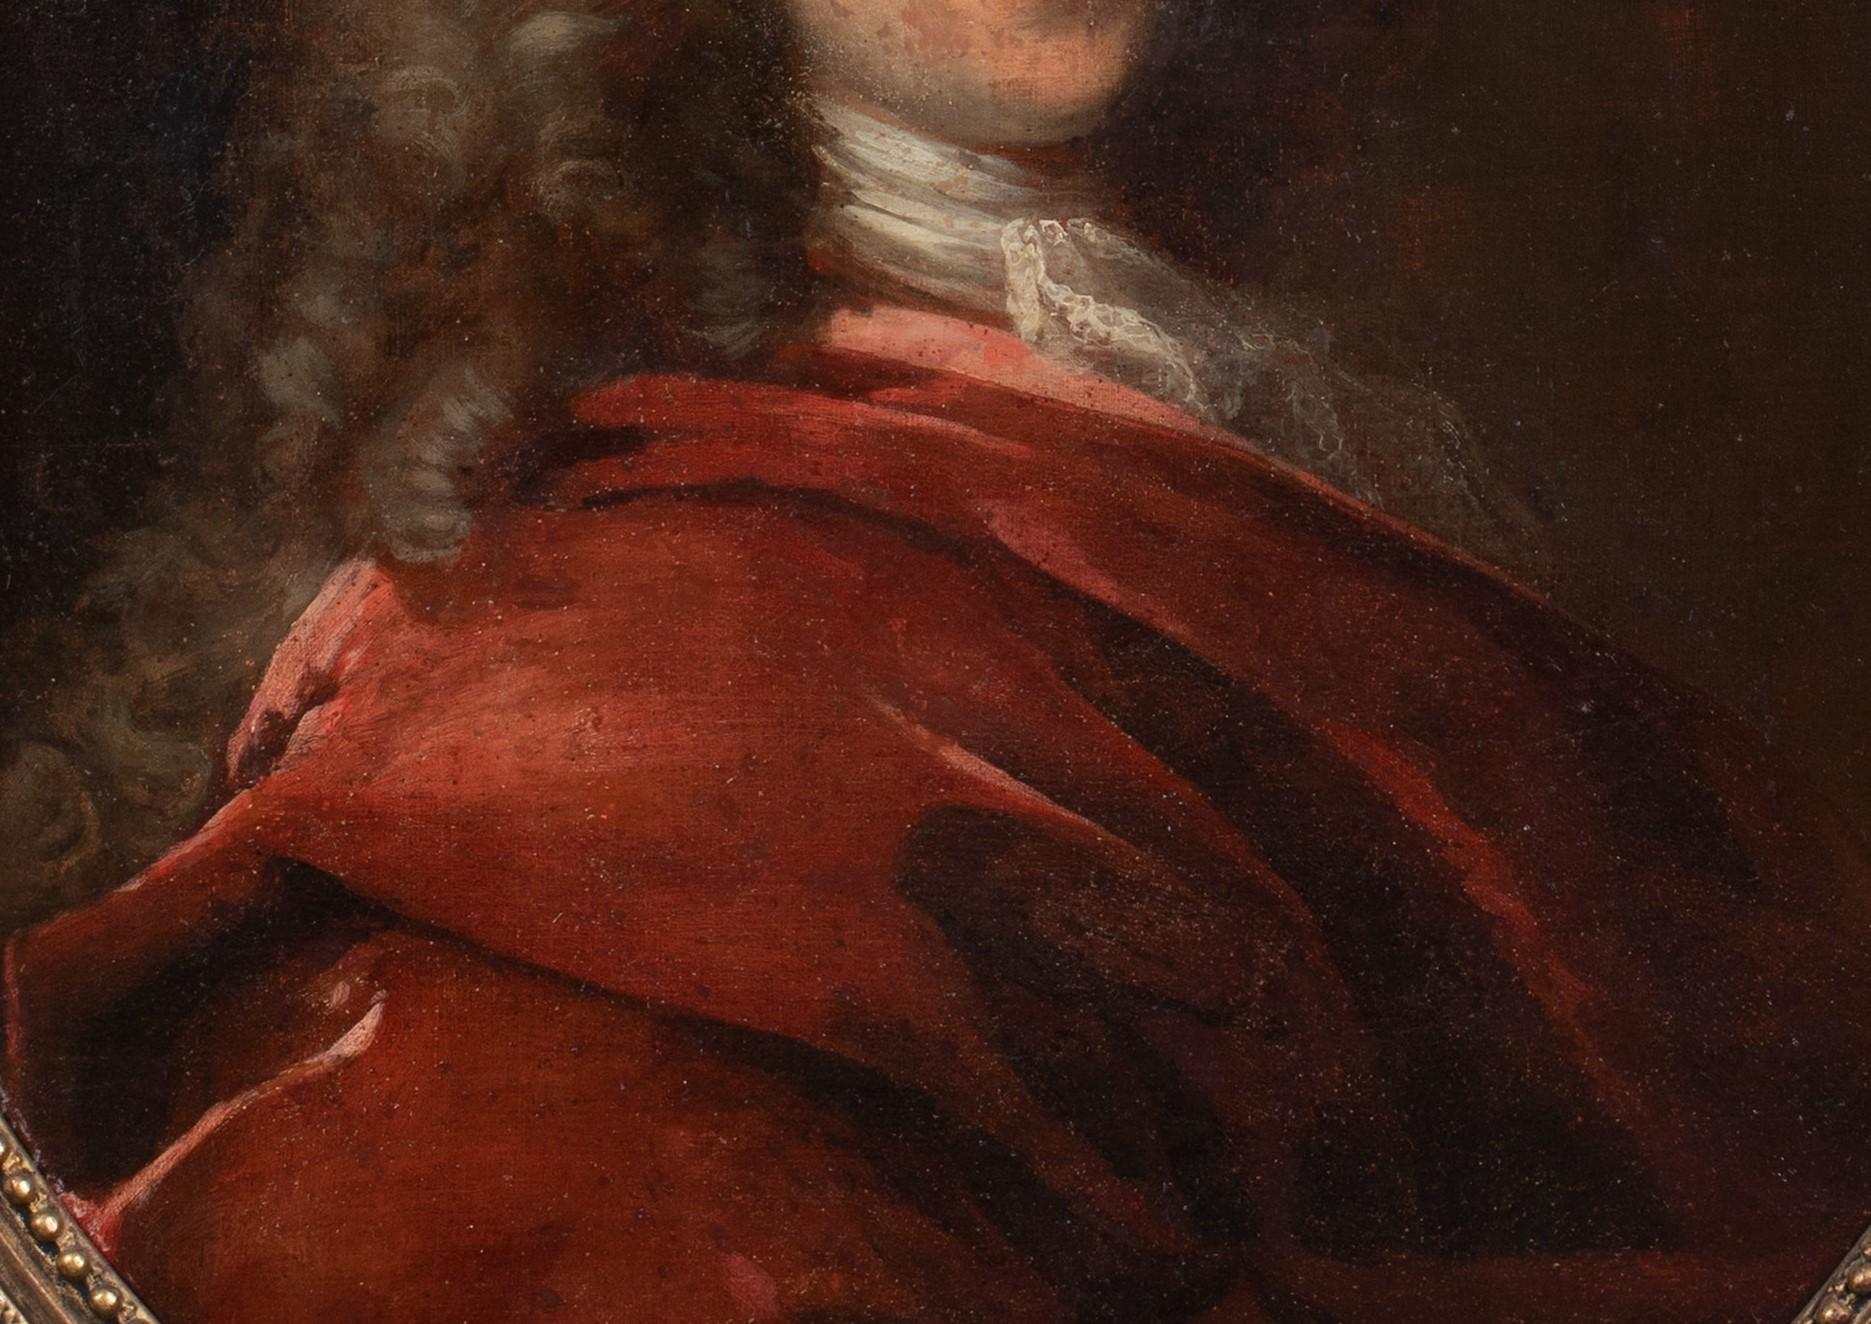 Portrait Of Monsieur De Cotte, circa 1710

circle of Hyacinthe RIGAUD (1659-1743) - one of a pair

Large circa 1710 French portrait of Monsieur De Cotte, oil on canvas. Excellent quality and condition oval portrait of the gentleman wearing red robes